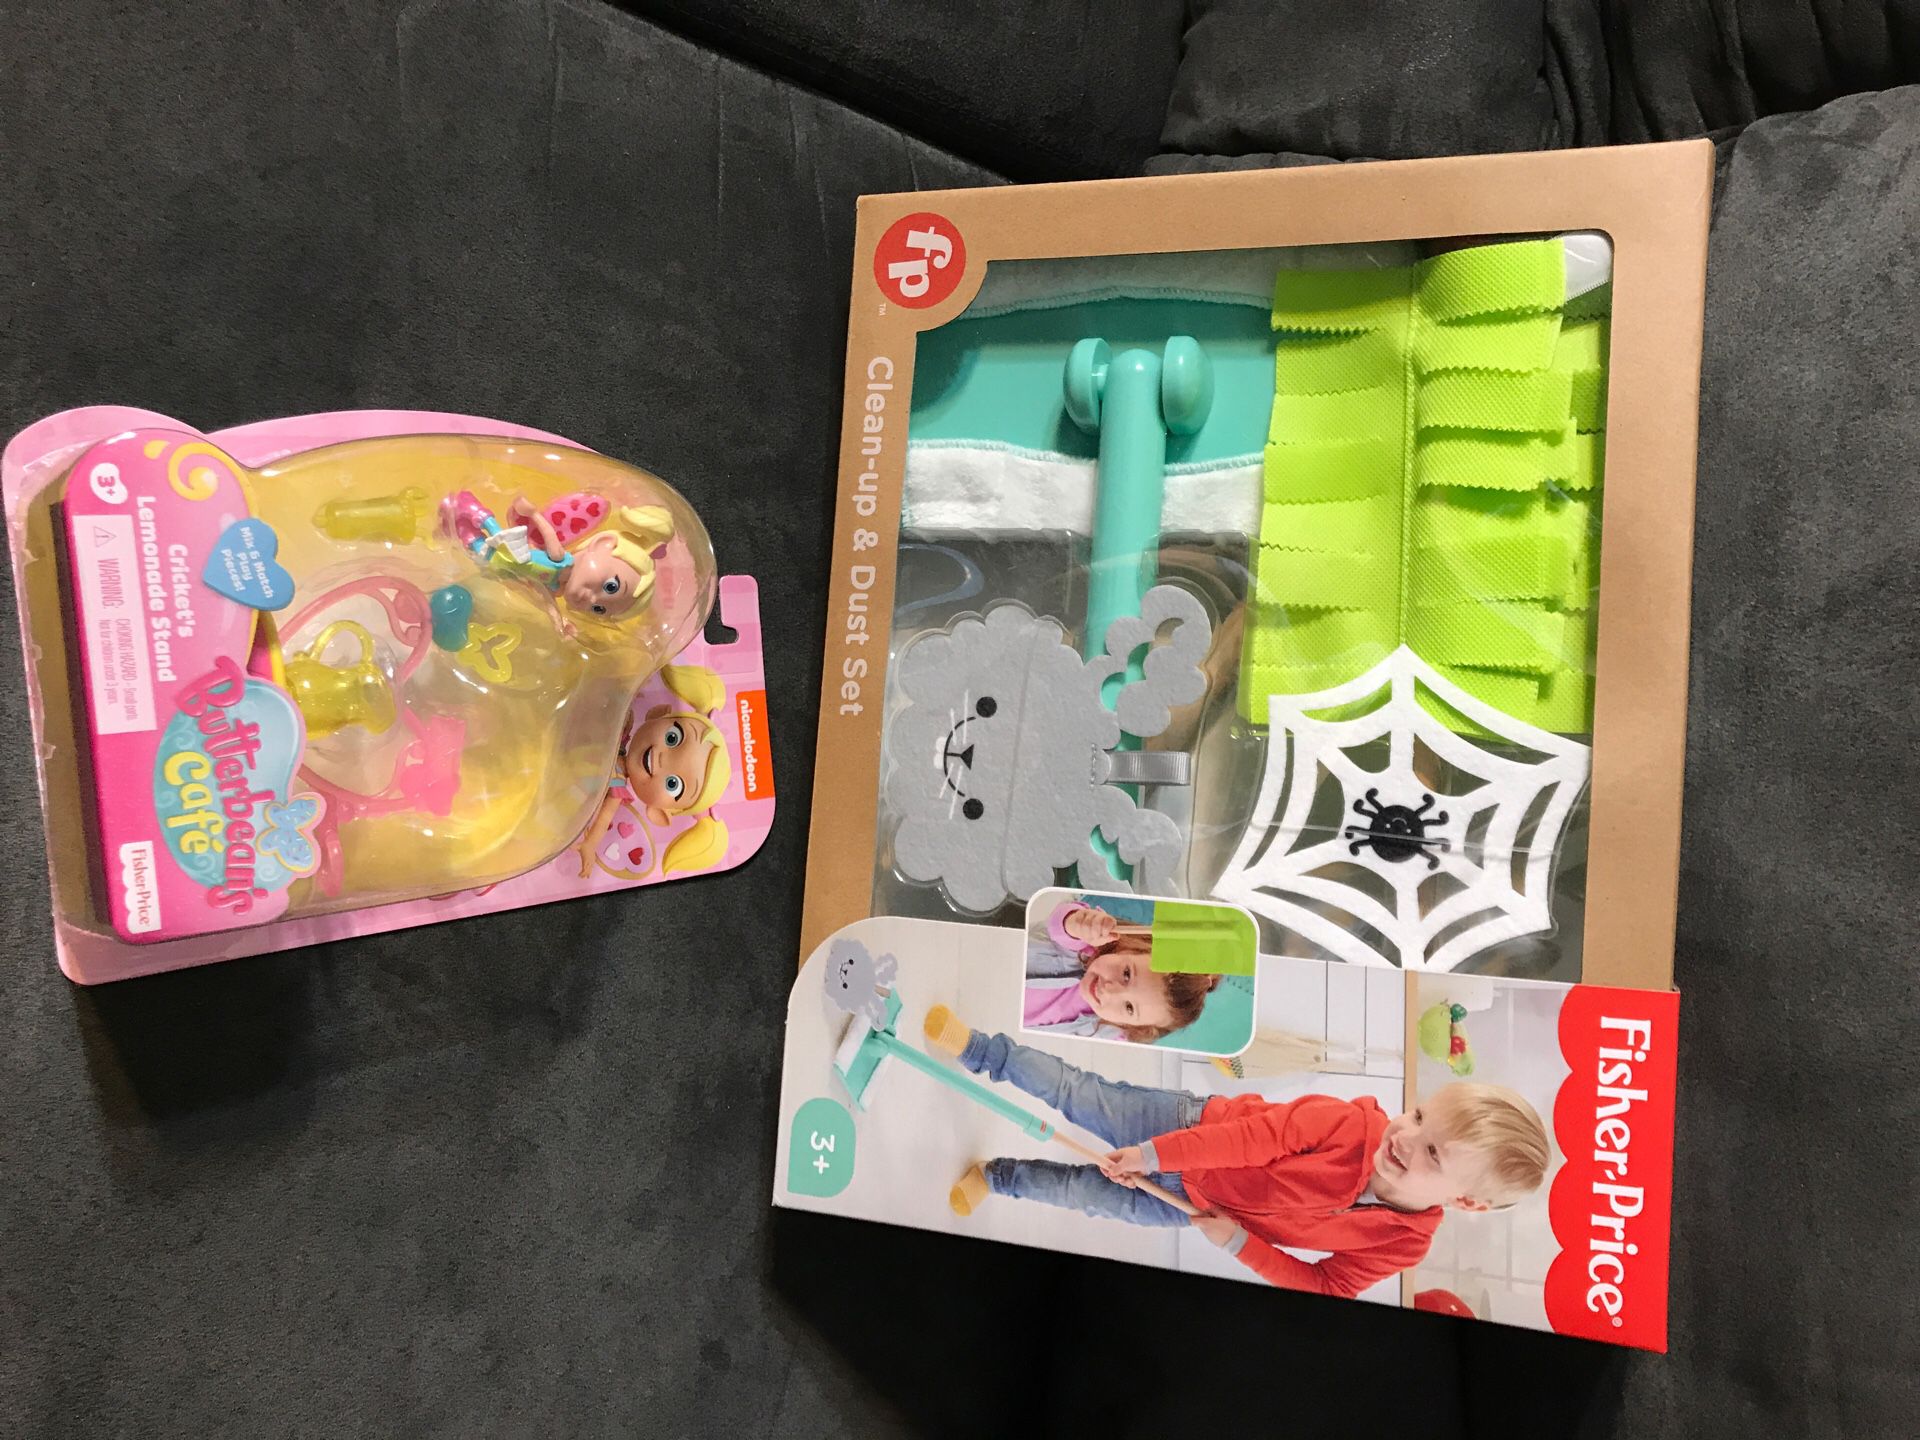 Clean up dust set + butterbeans cafe doll both $10new